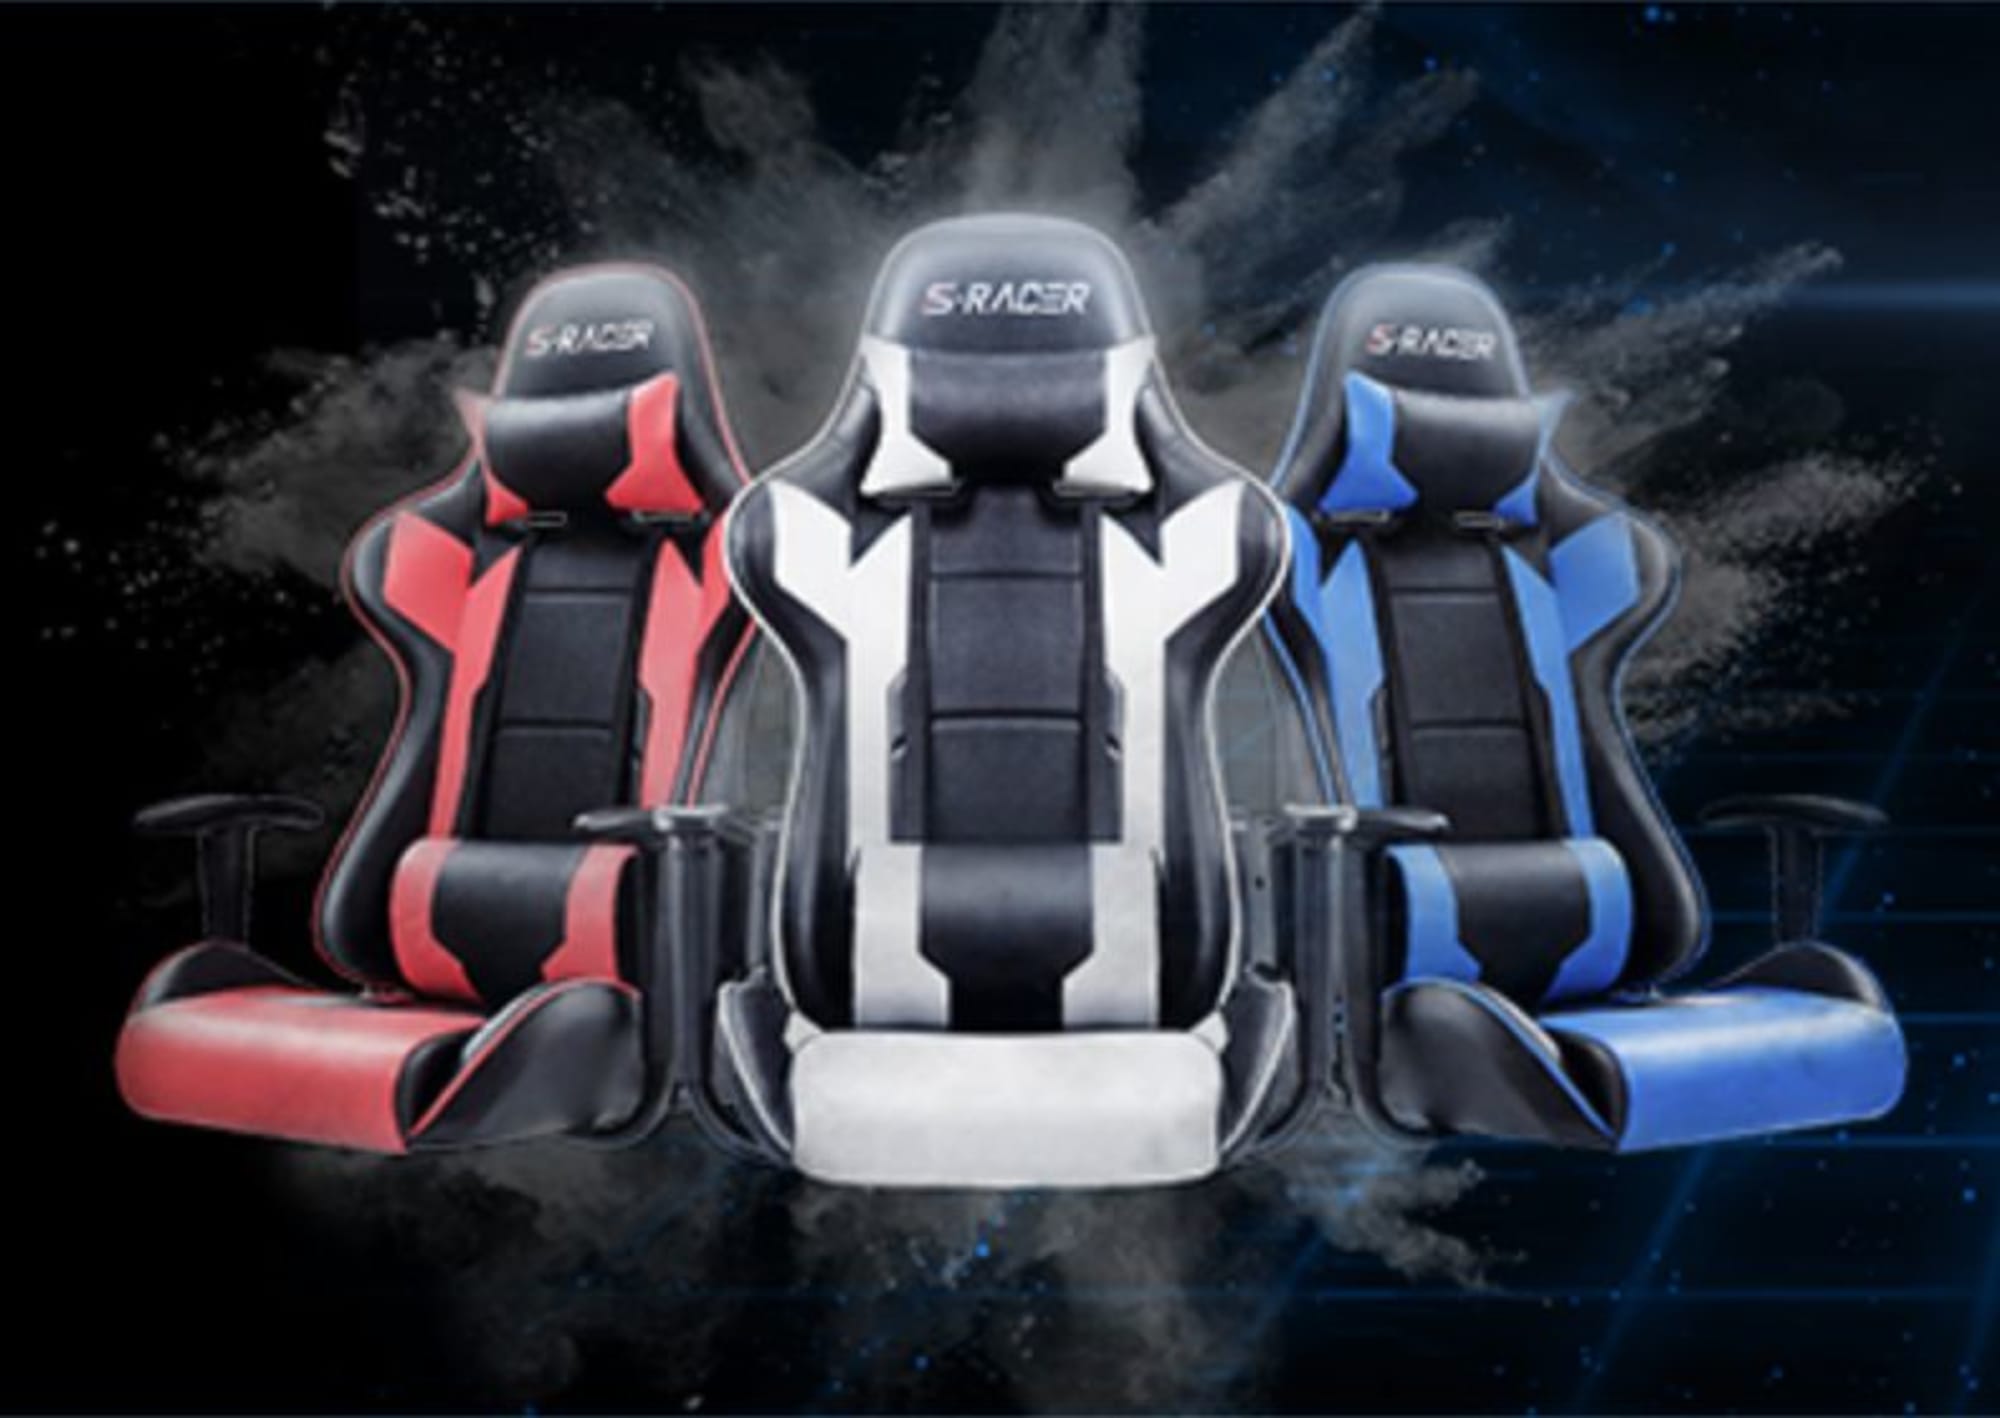 Get Amazon's Best-Selling Gaming Chair, the S-Racer, on Sale for $140